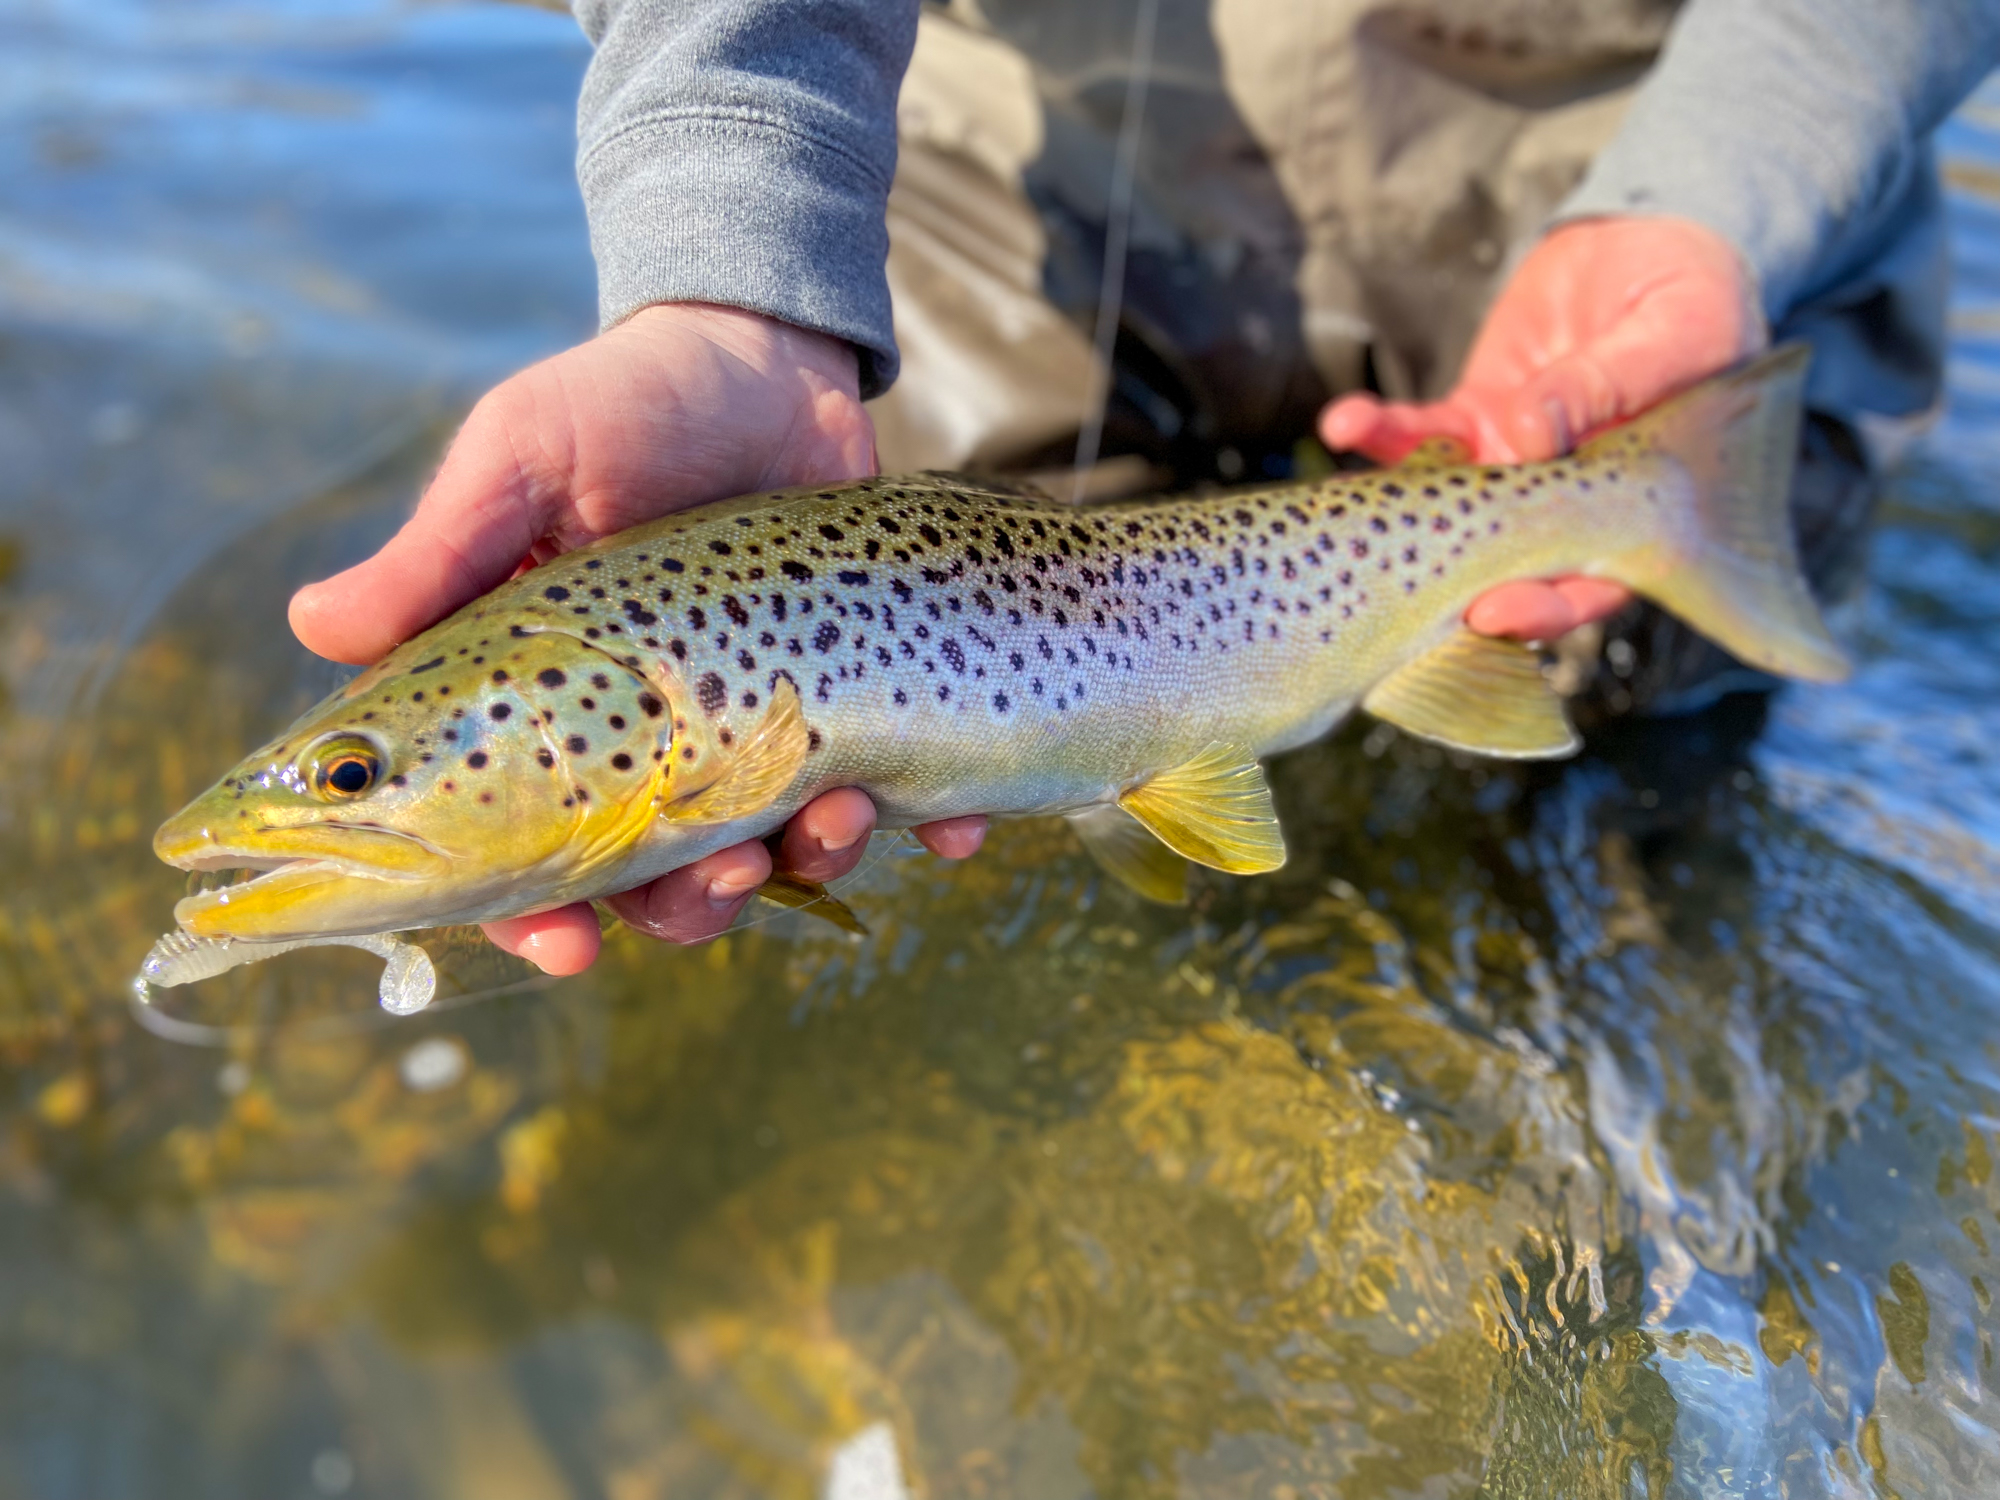 Choosing a Guide - Essential Tips for Selecting a Fly Fishing Guide